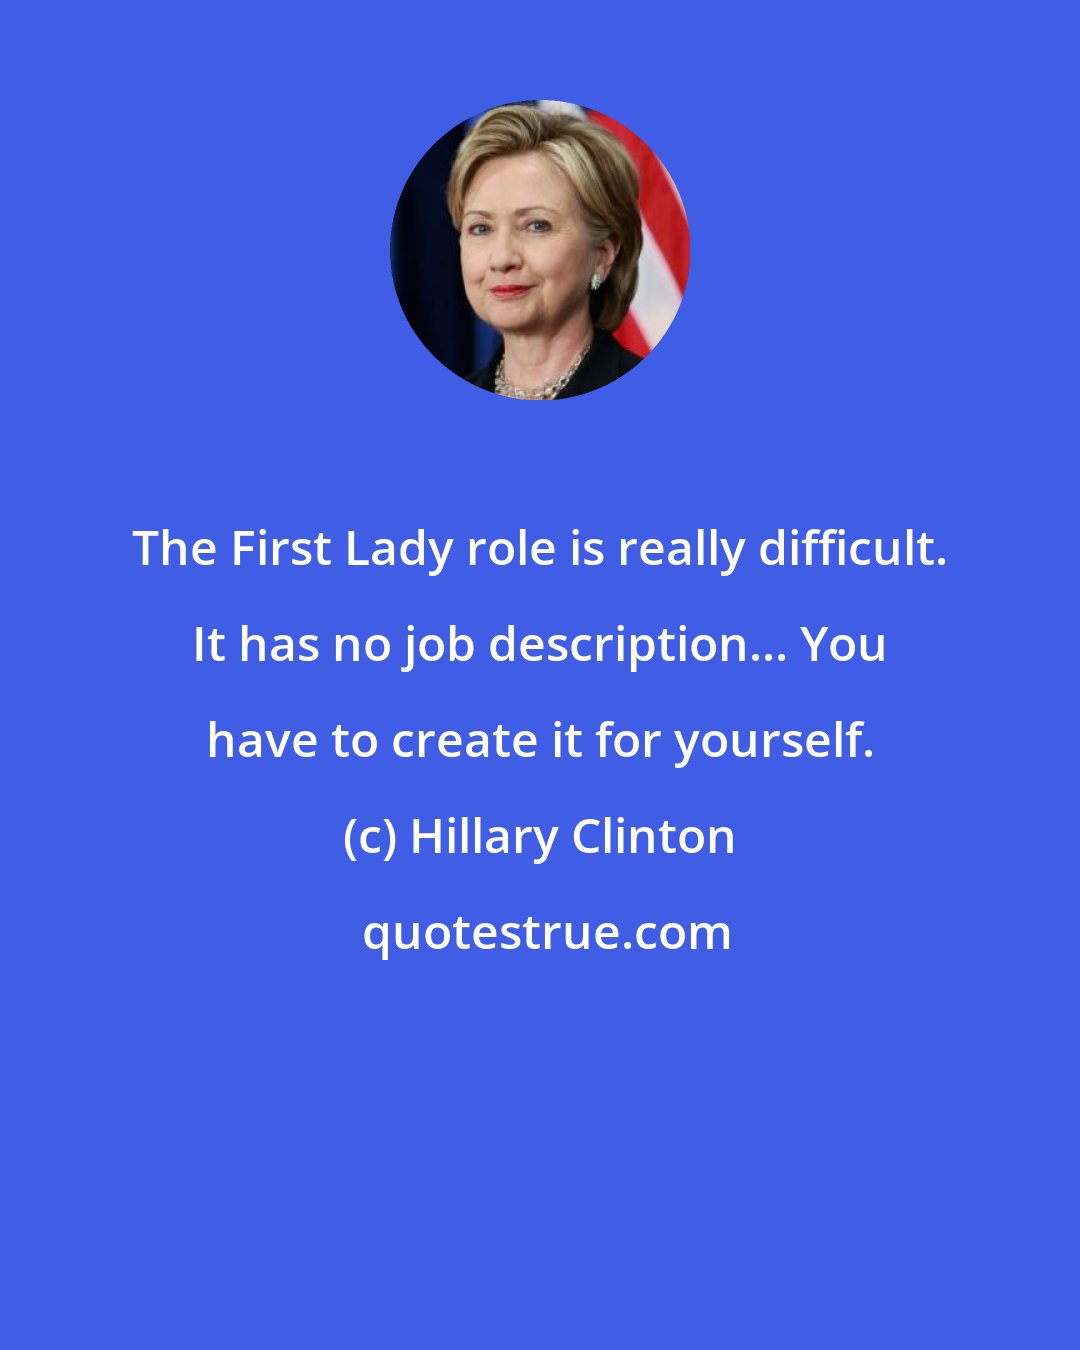 Hillary Clinton: The First Lady role is really difficult. It has no job description... You have to create it for yourself.